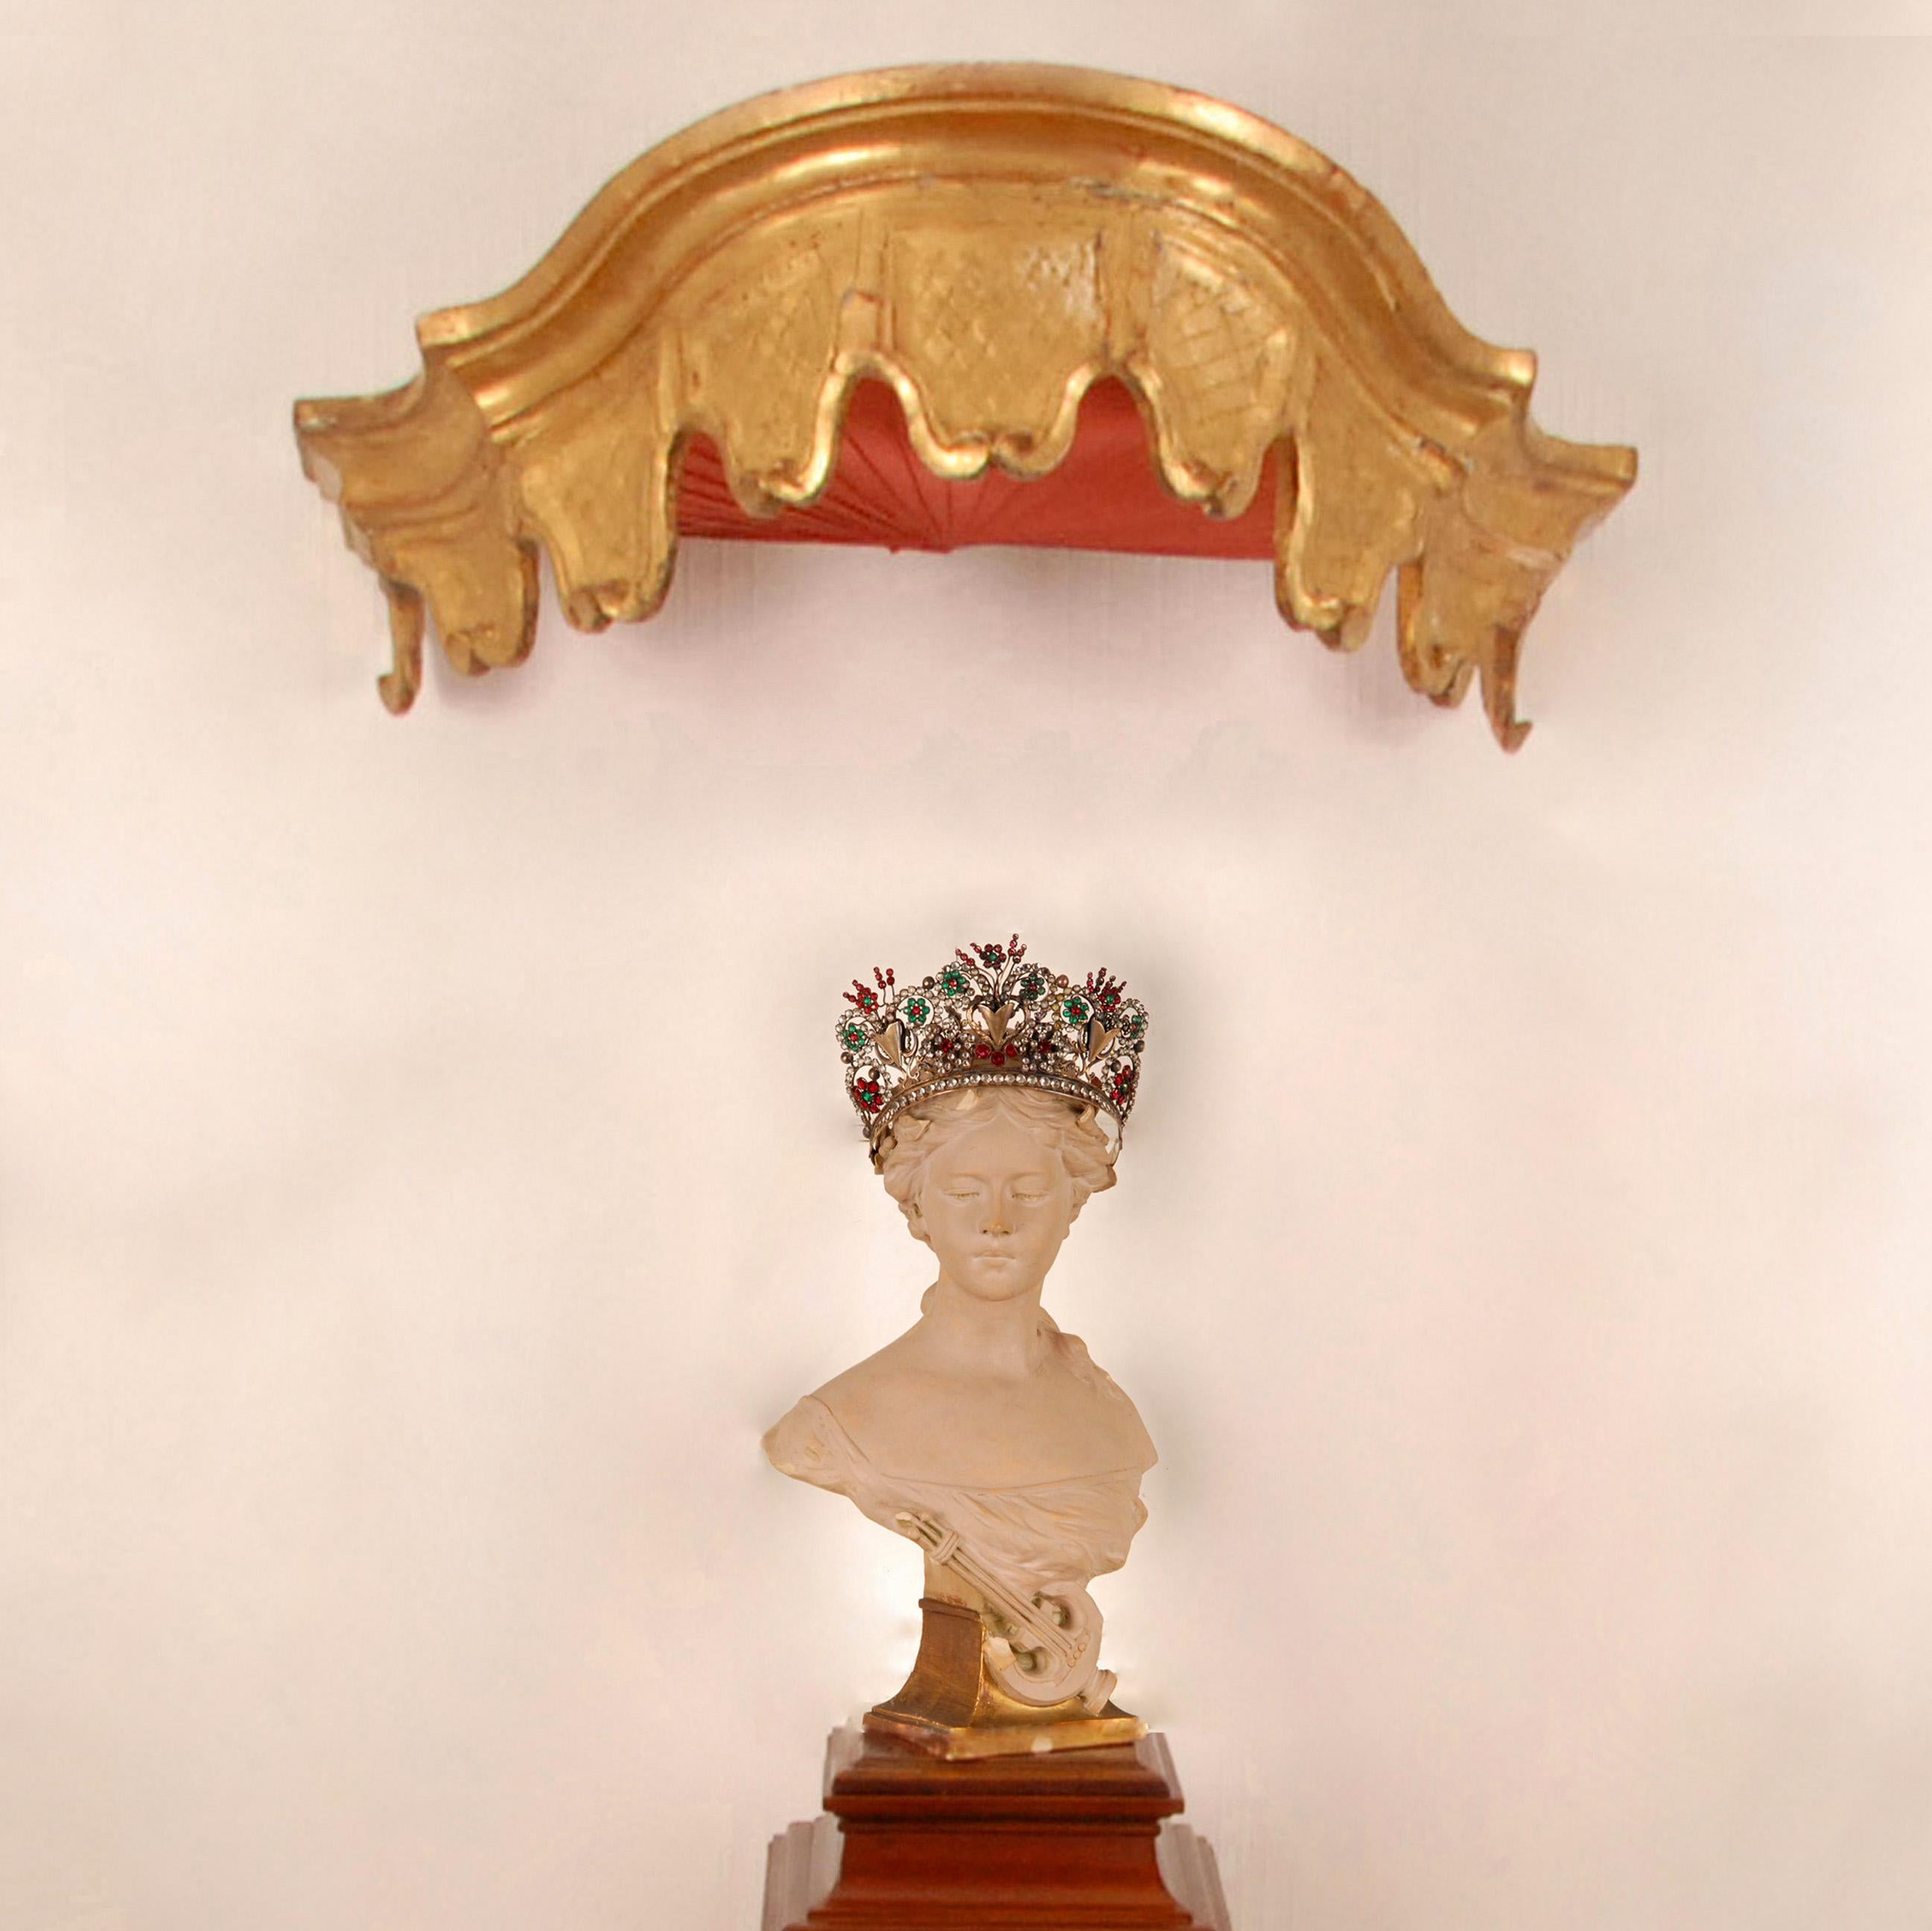 18th Century French country carved giltwood corona bed canopy altar wall ornament.
Product: giltwood bed canopy altar wall ornament (painting is not included)
Material: giltwood, fruitwood and silk
Style: French Country, French provincial, Louis